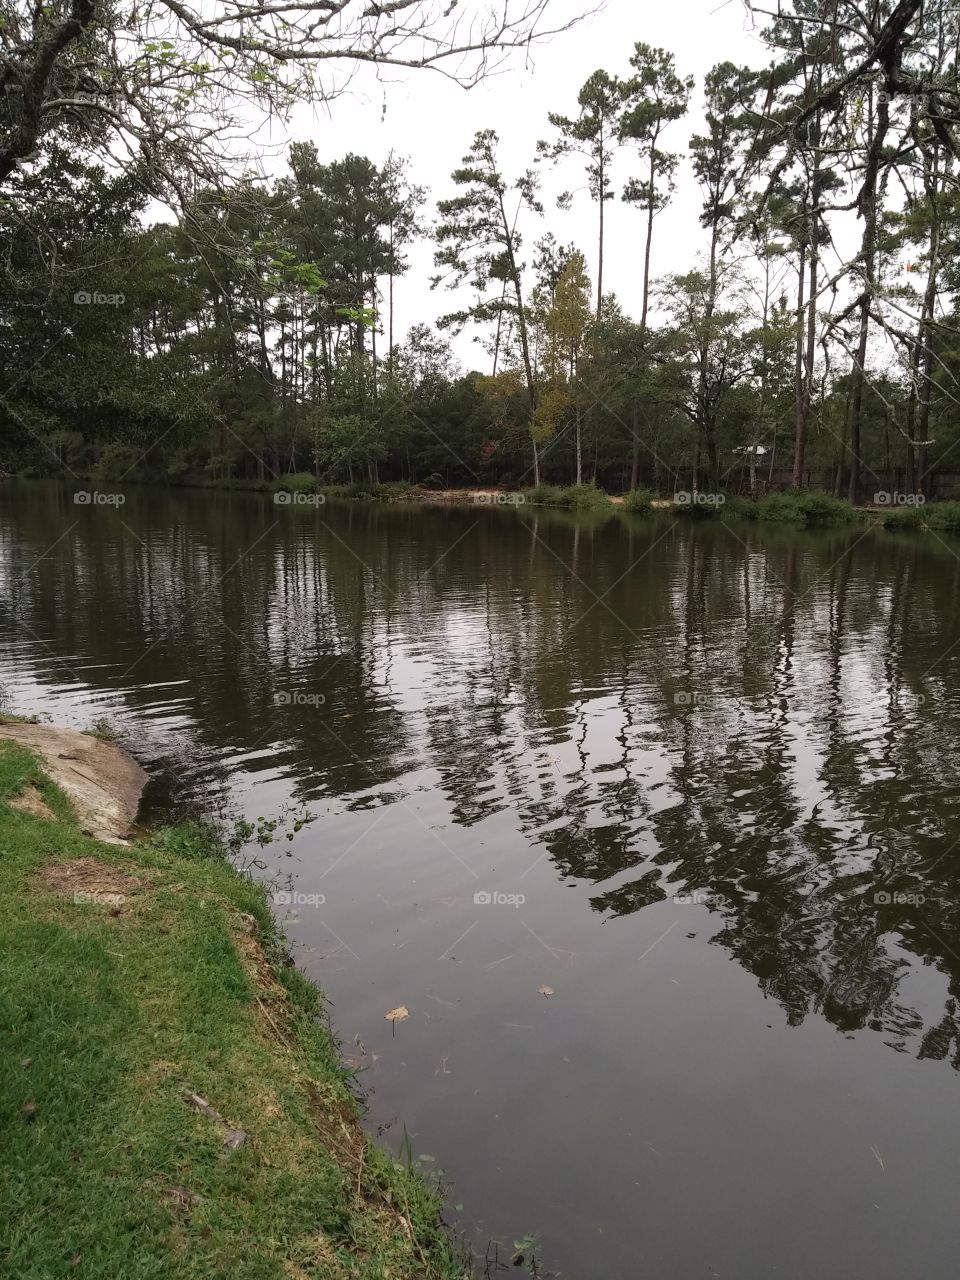 LynnHaven Pond. An elongated pond in the country.